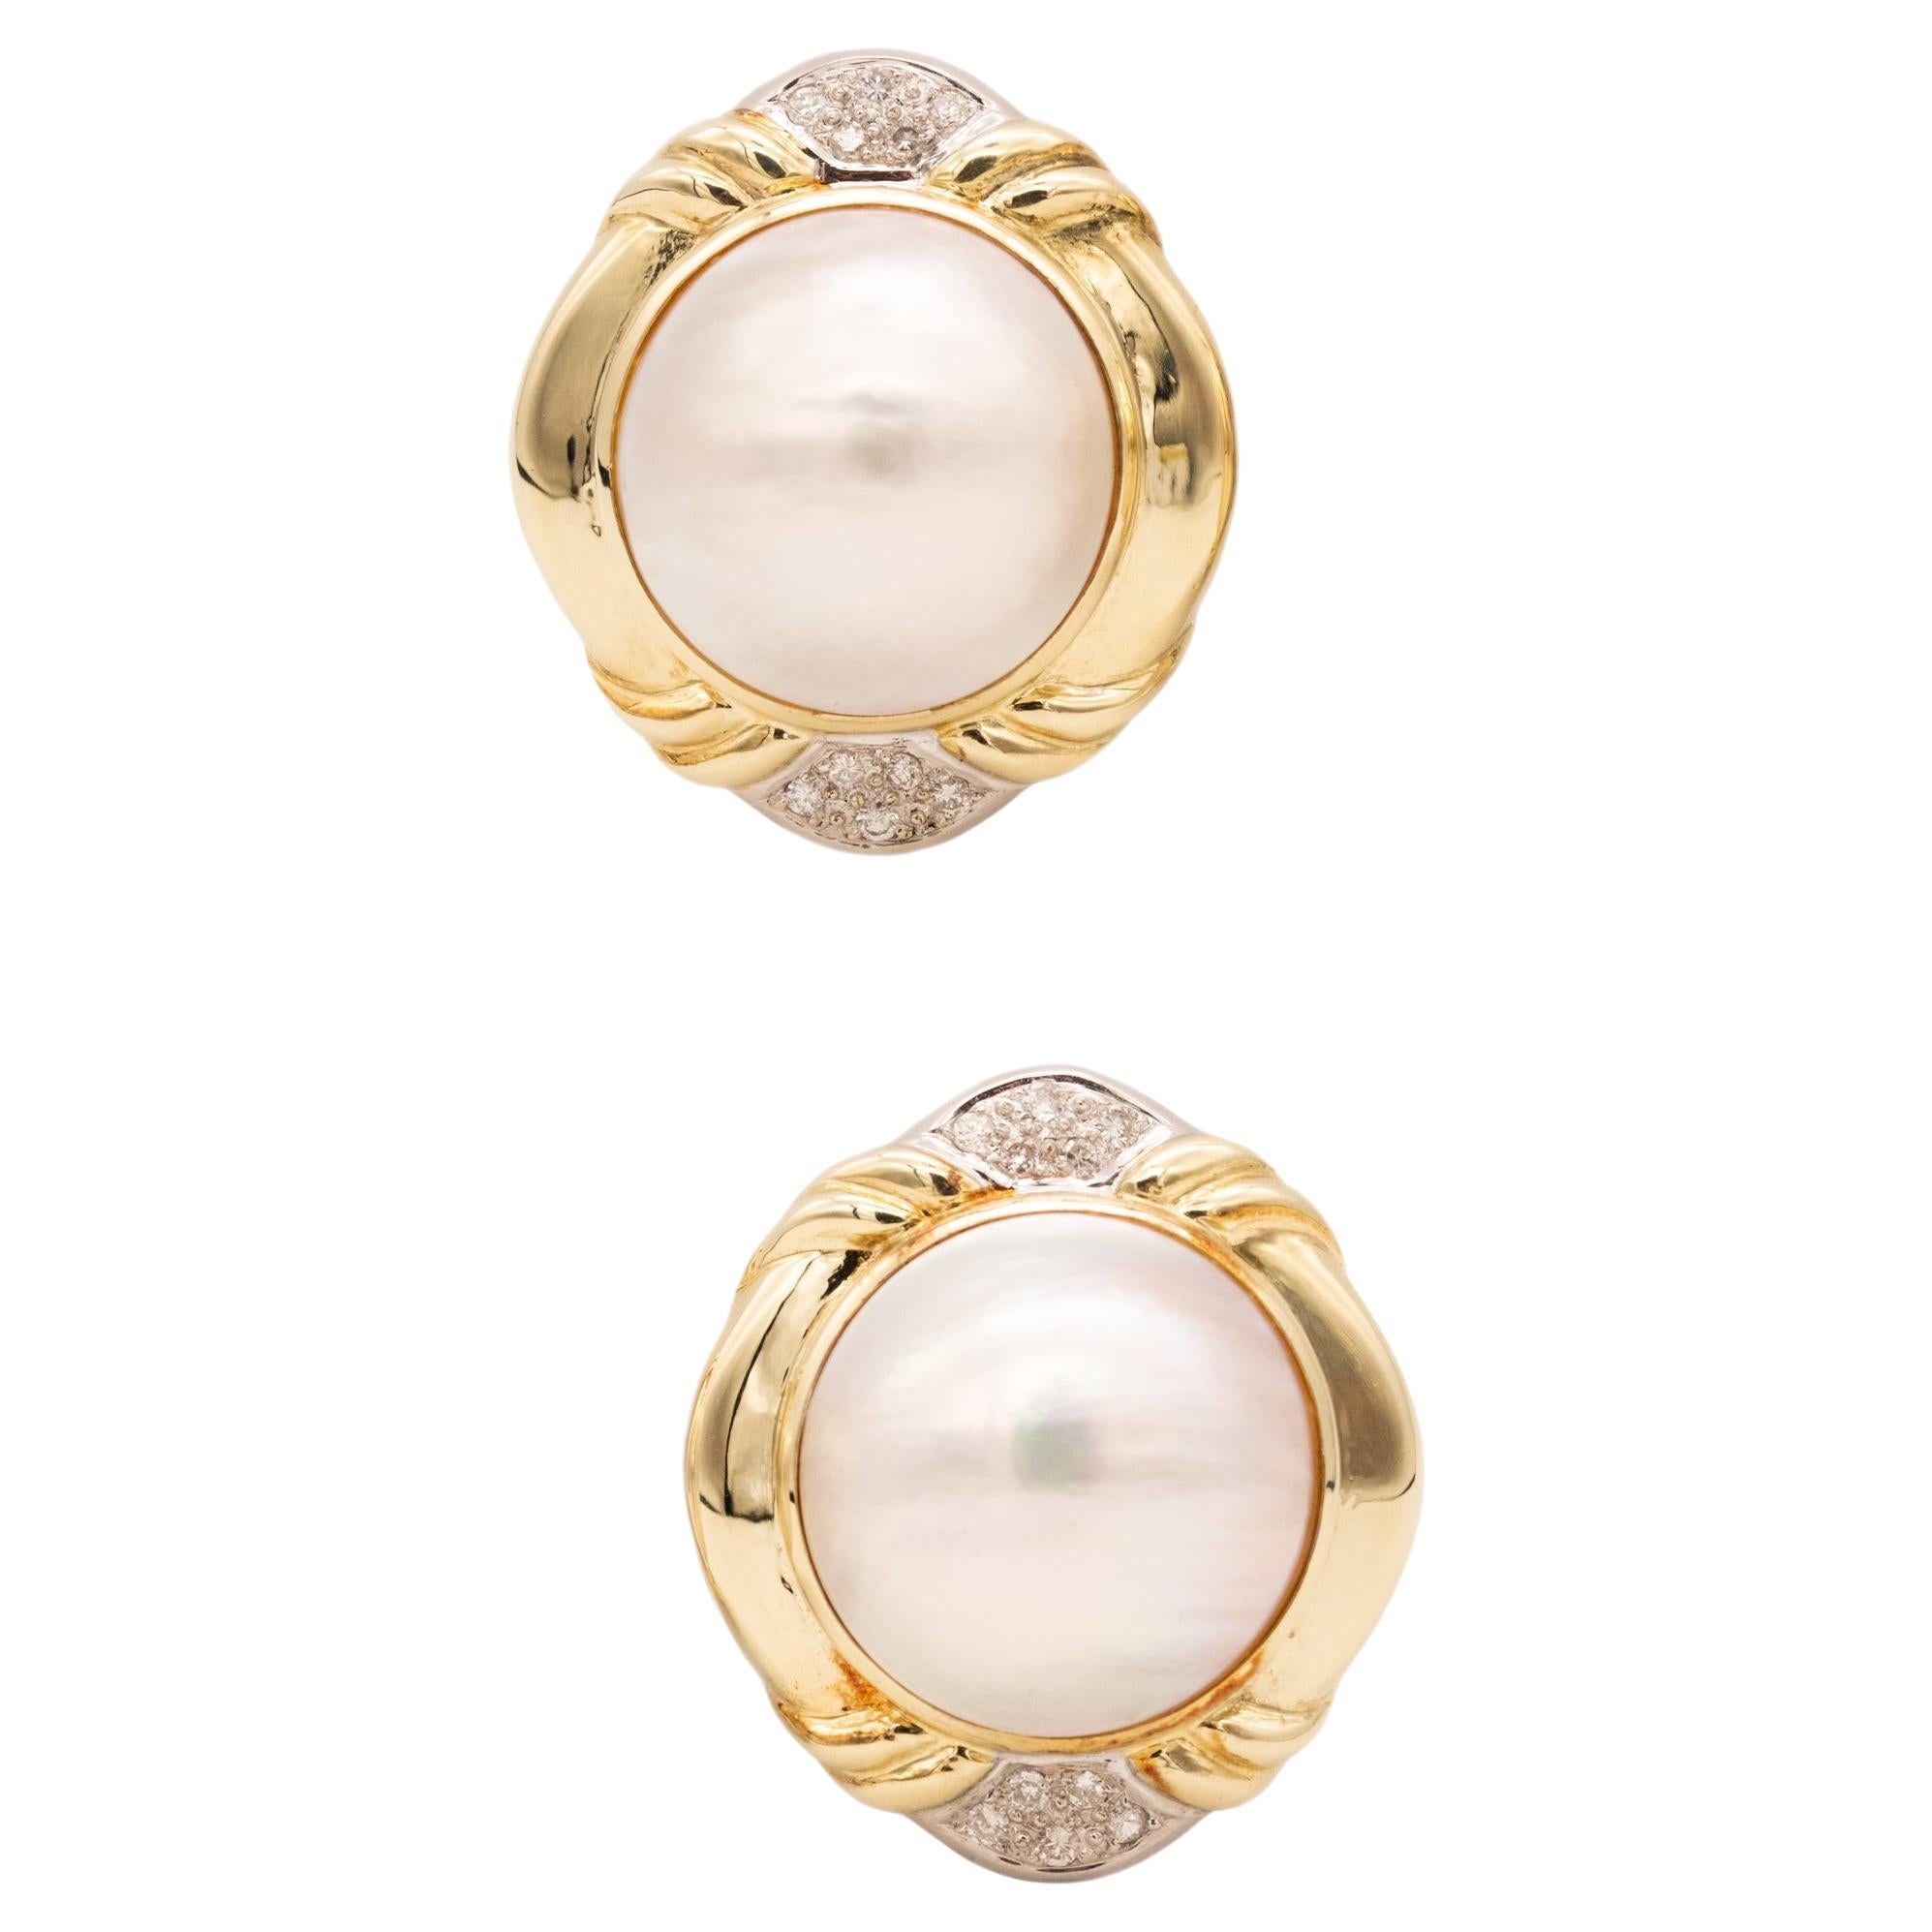 Italian Modern Pair Of Earrings In 14Kt Yellow Gold 20 MM Mabe Pearls Diamonds